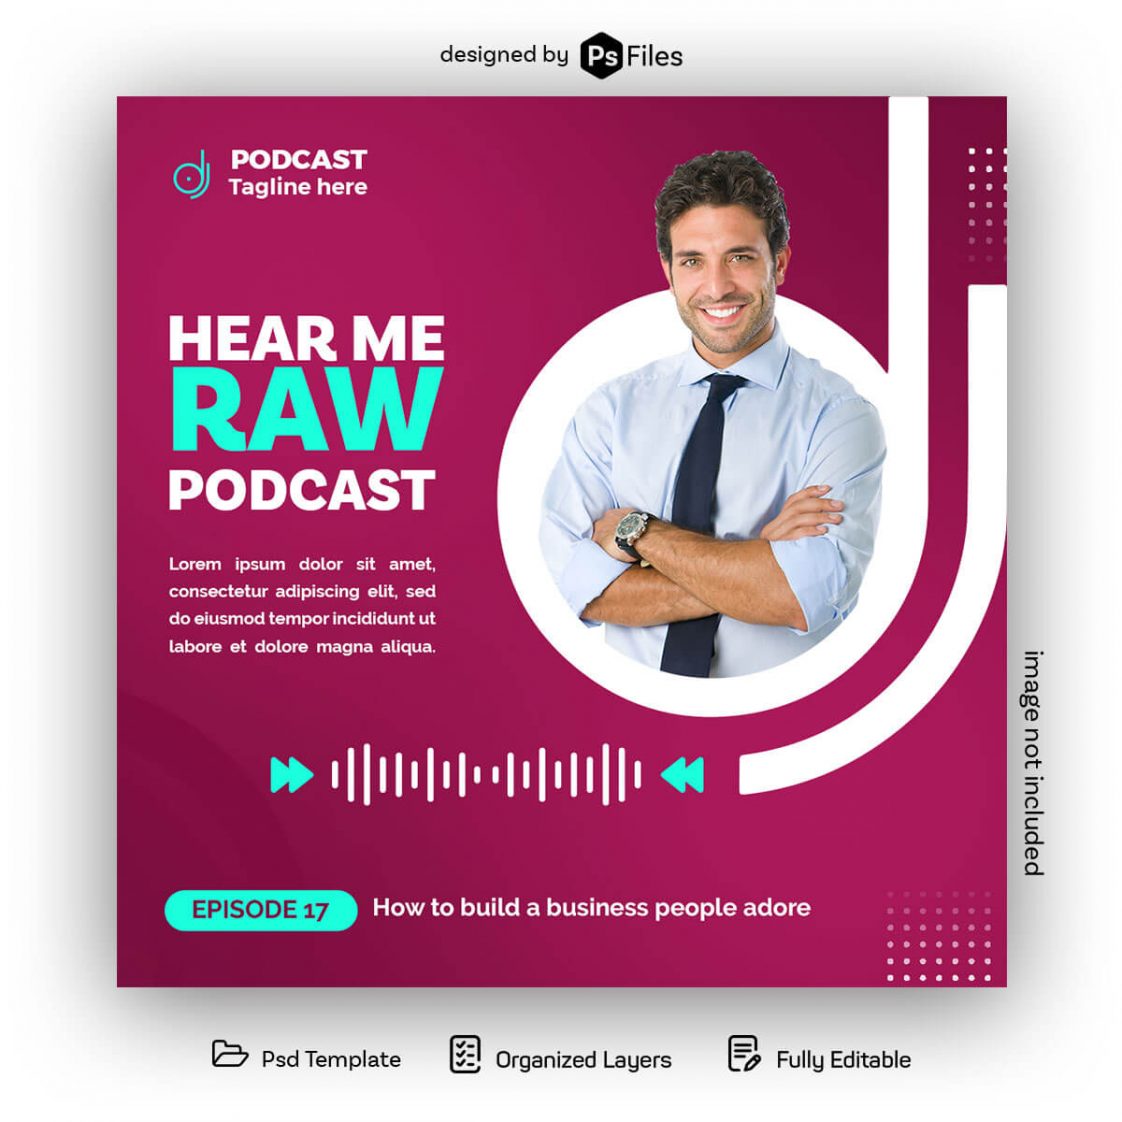 Free Podcast Cover Art Template Design Psd Psfiles